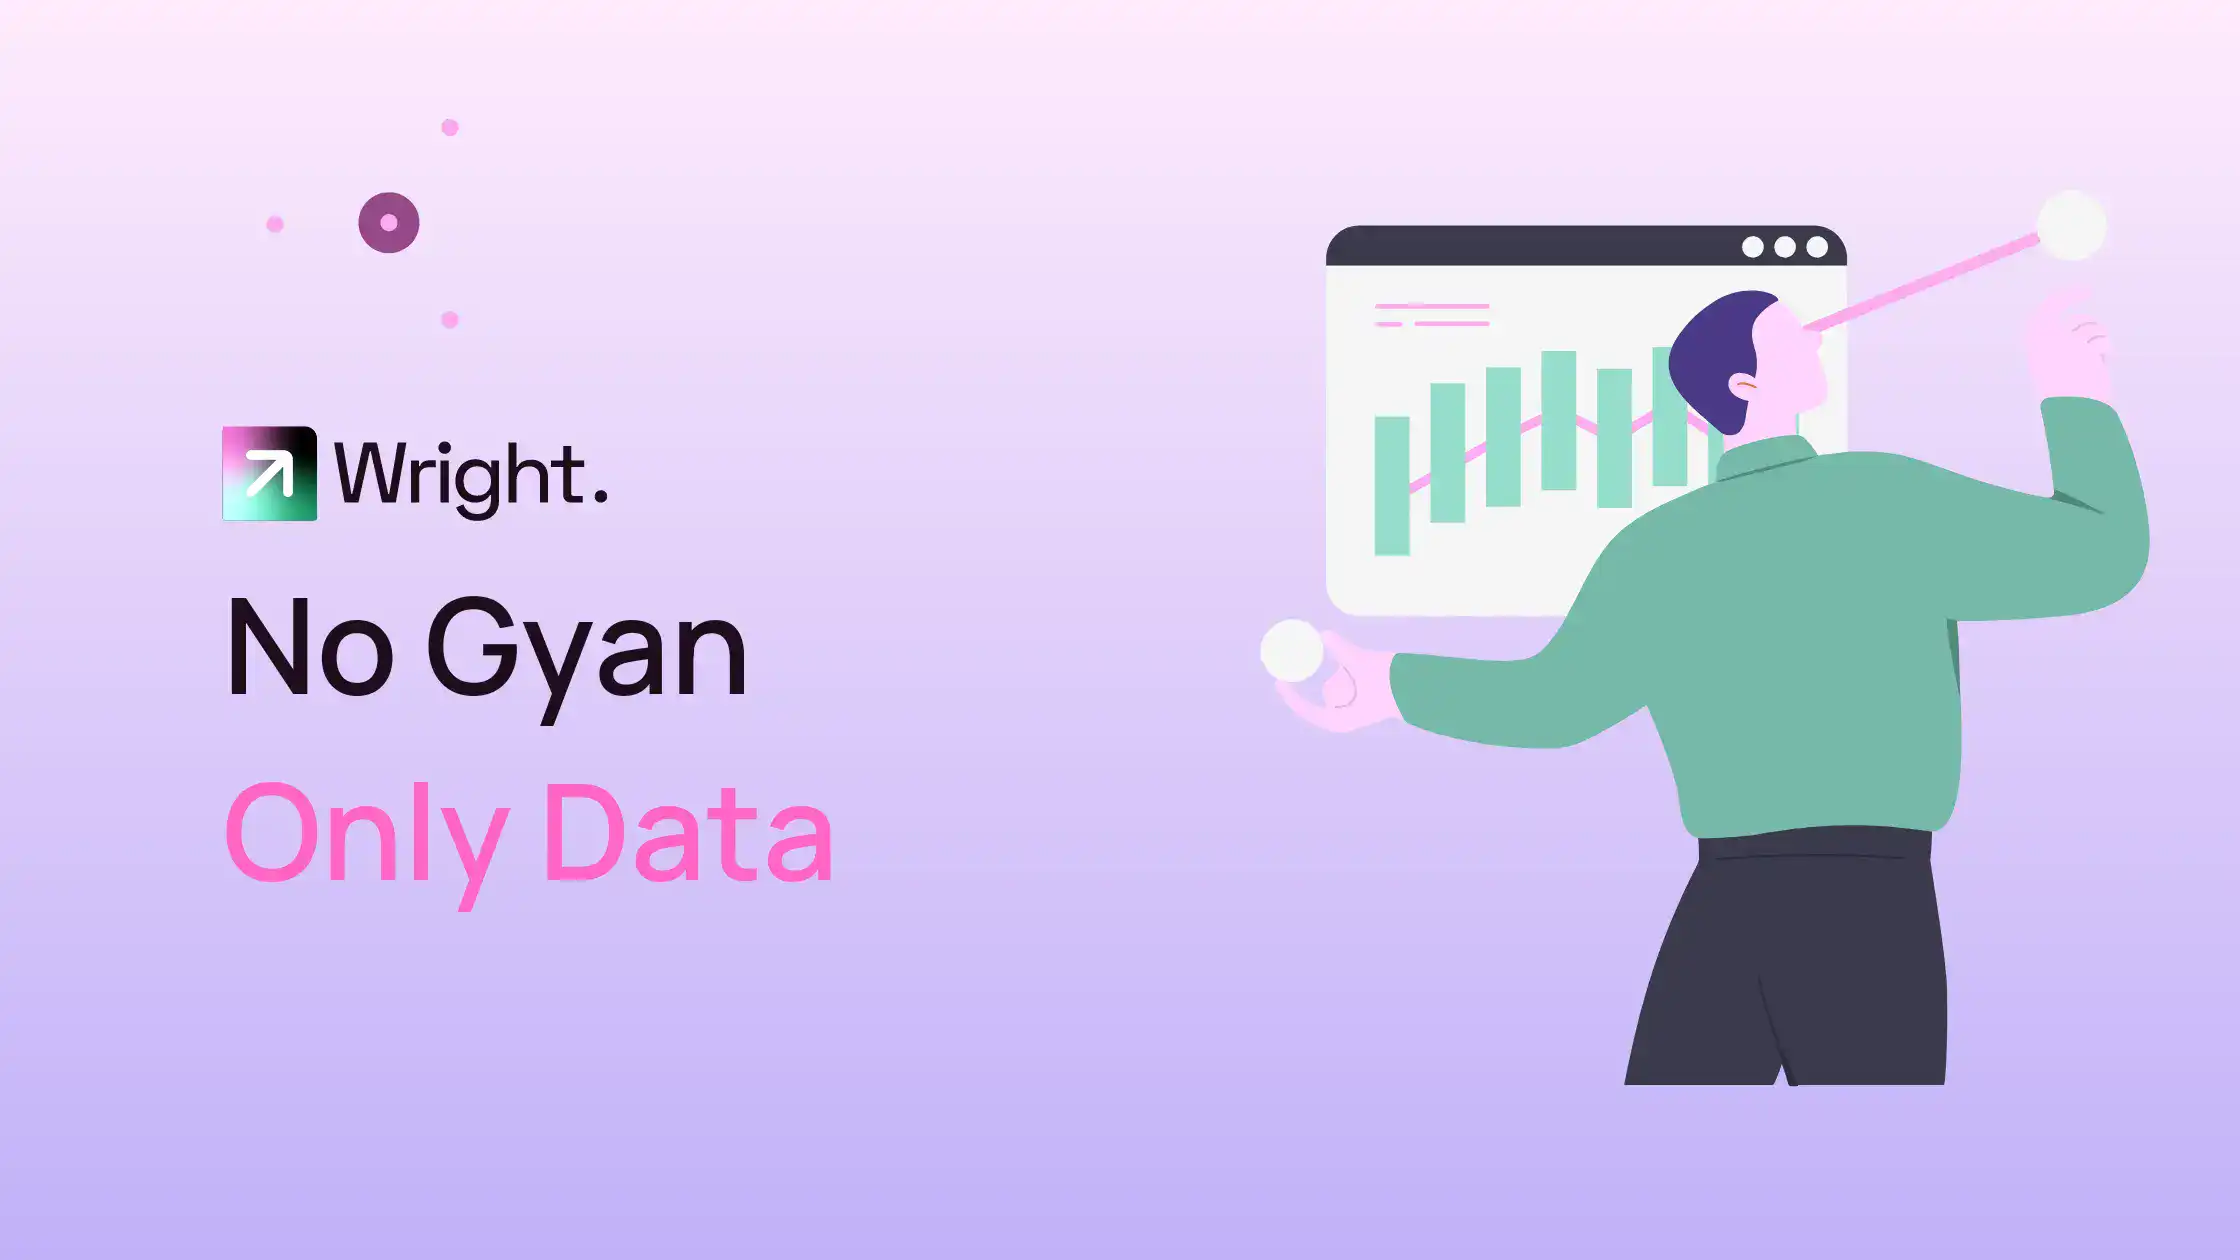 No Gyan, Only Data